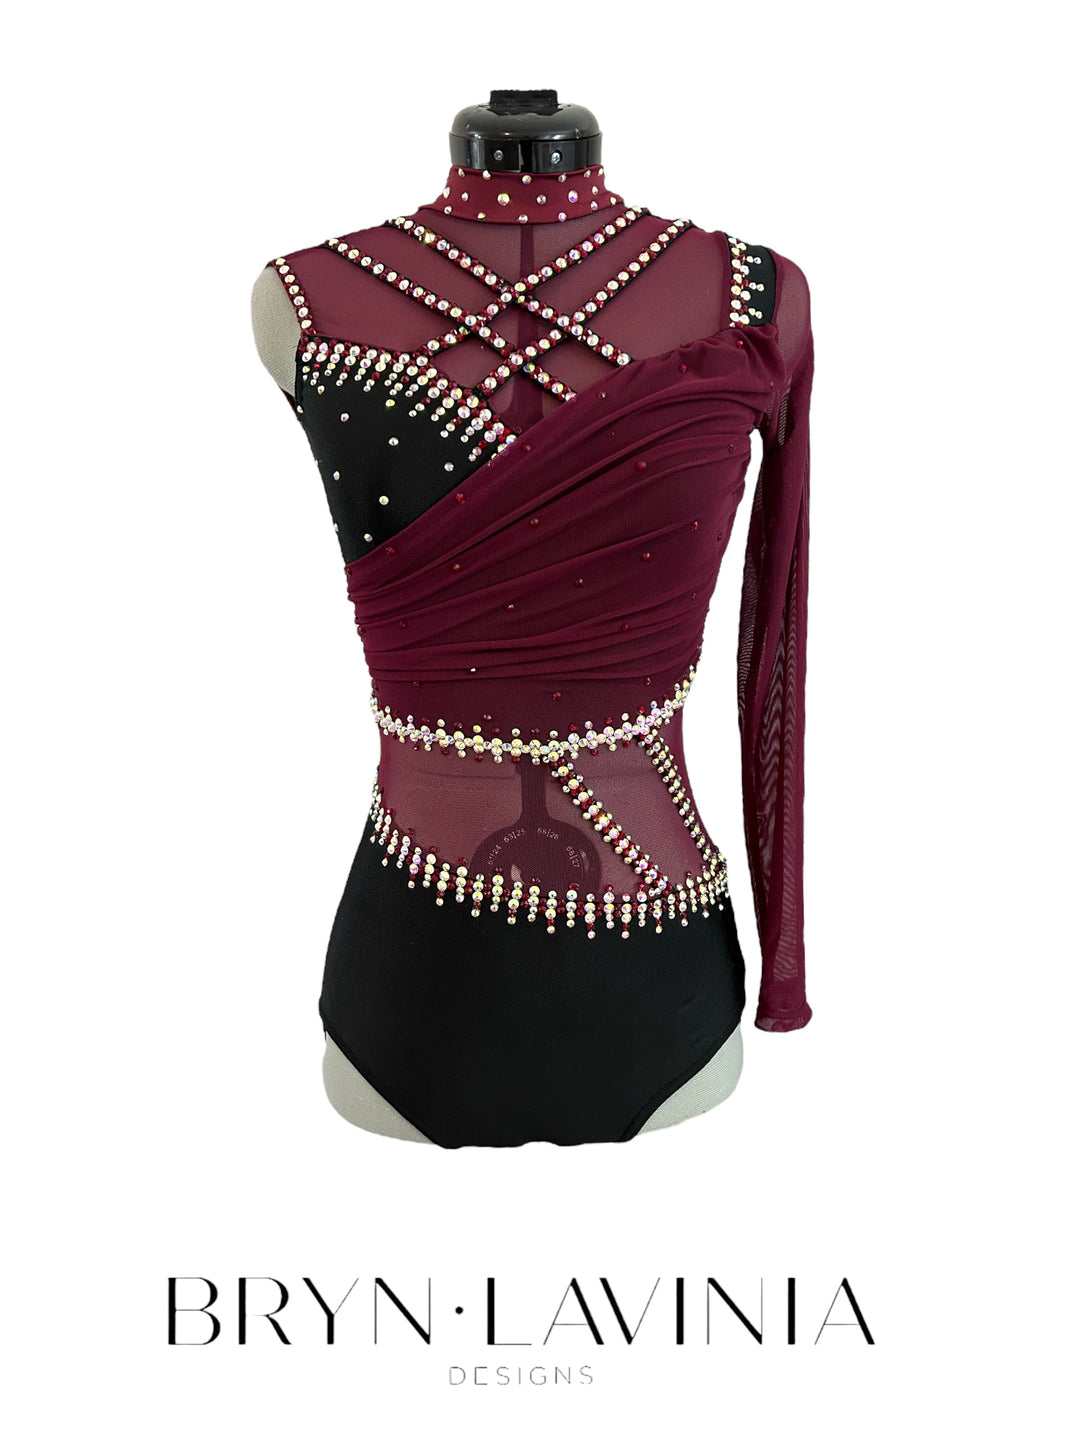 NEW Adult Small burgundy/black ready to ship costume